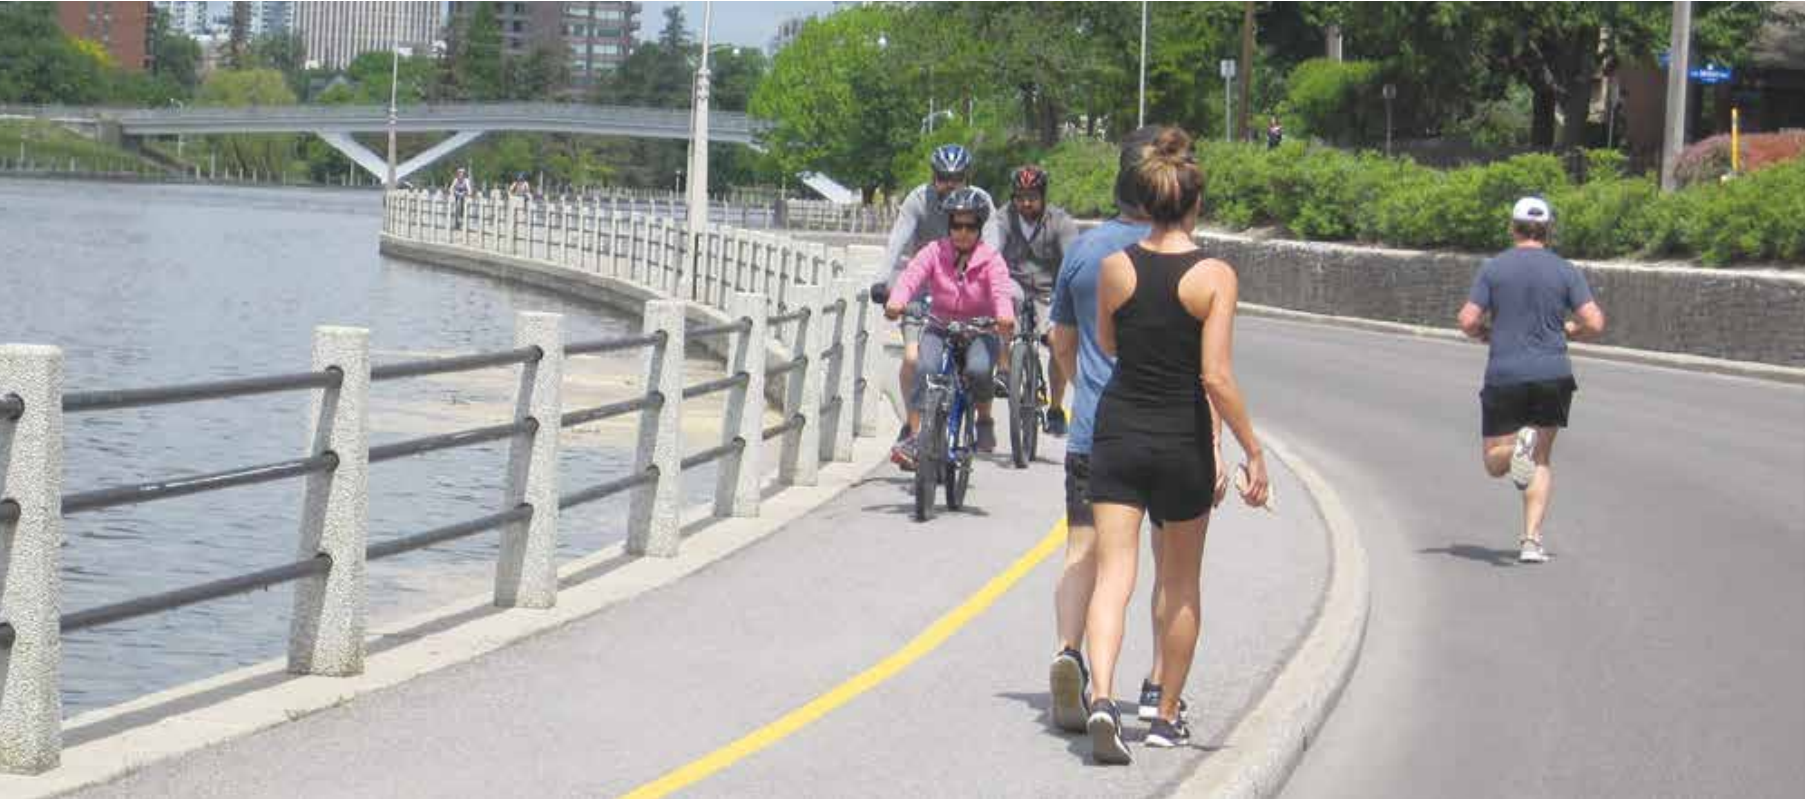 The Old Ottawa East Community Association believes that rather than closing Colonel By Drive to motorists, active transportation should be encouraged by widening the pathway and adding bike lanes to the roadway.  Photo by John Dance